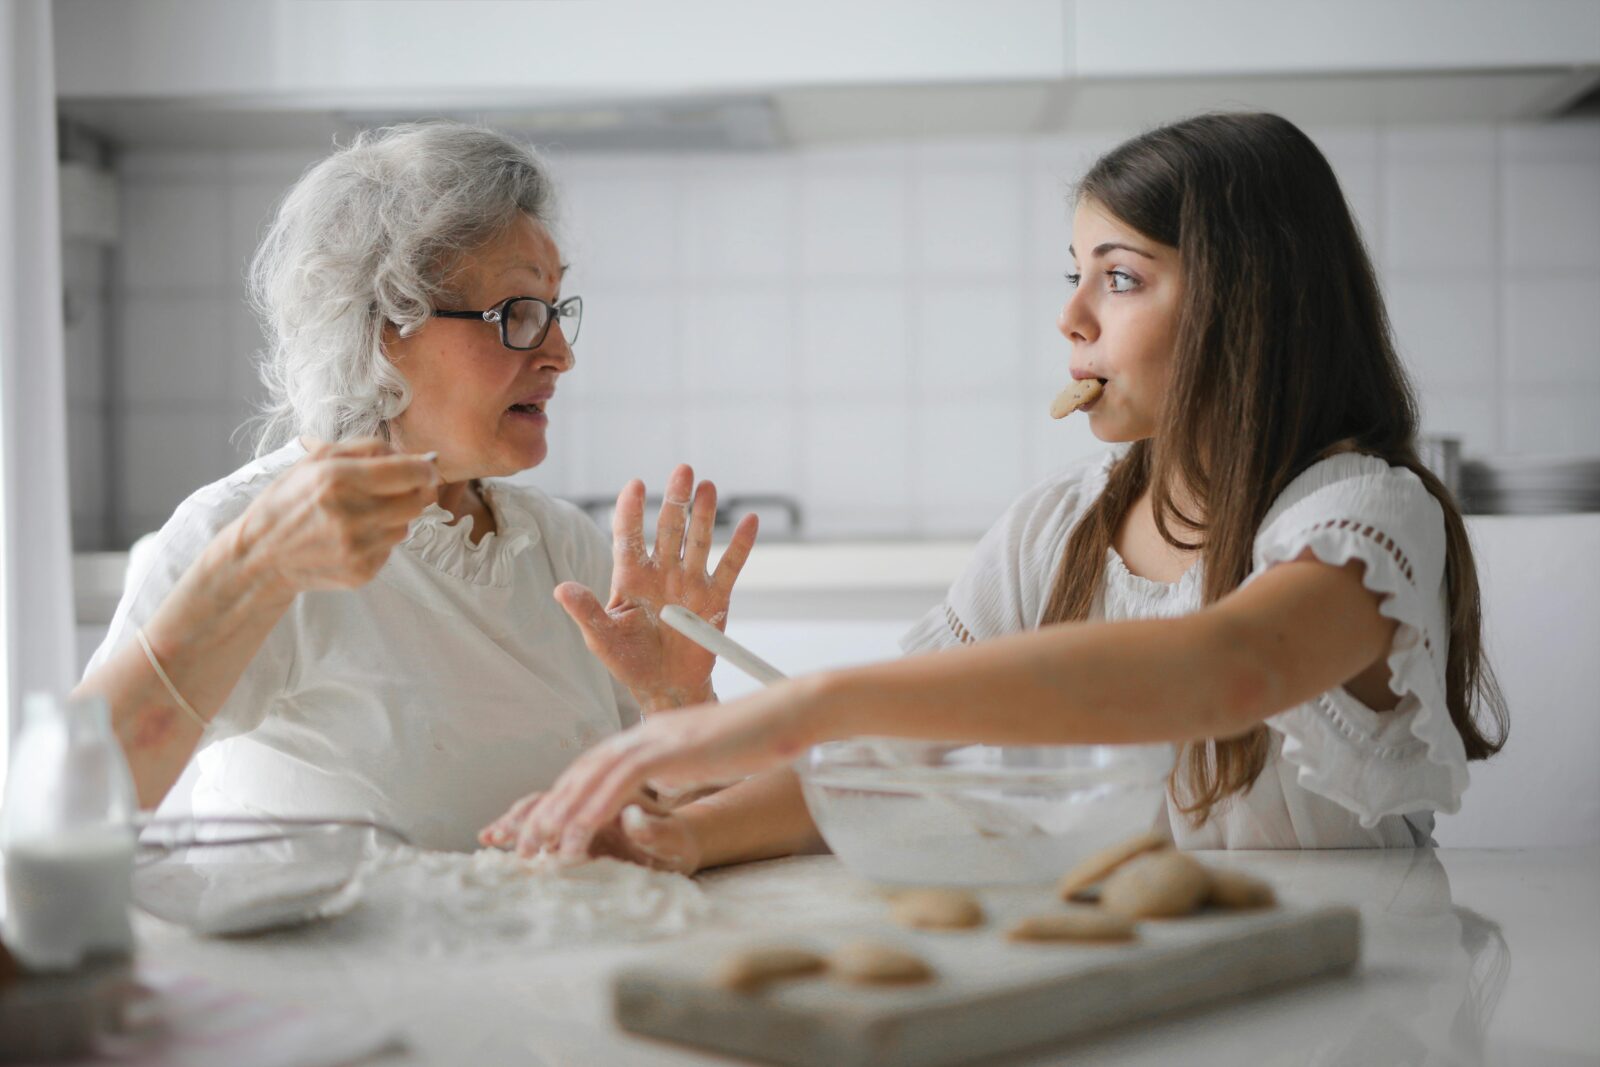 8 Tips for Providing Dignified Care to Aging Parents